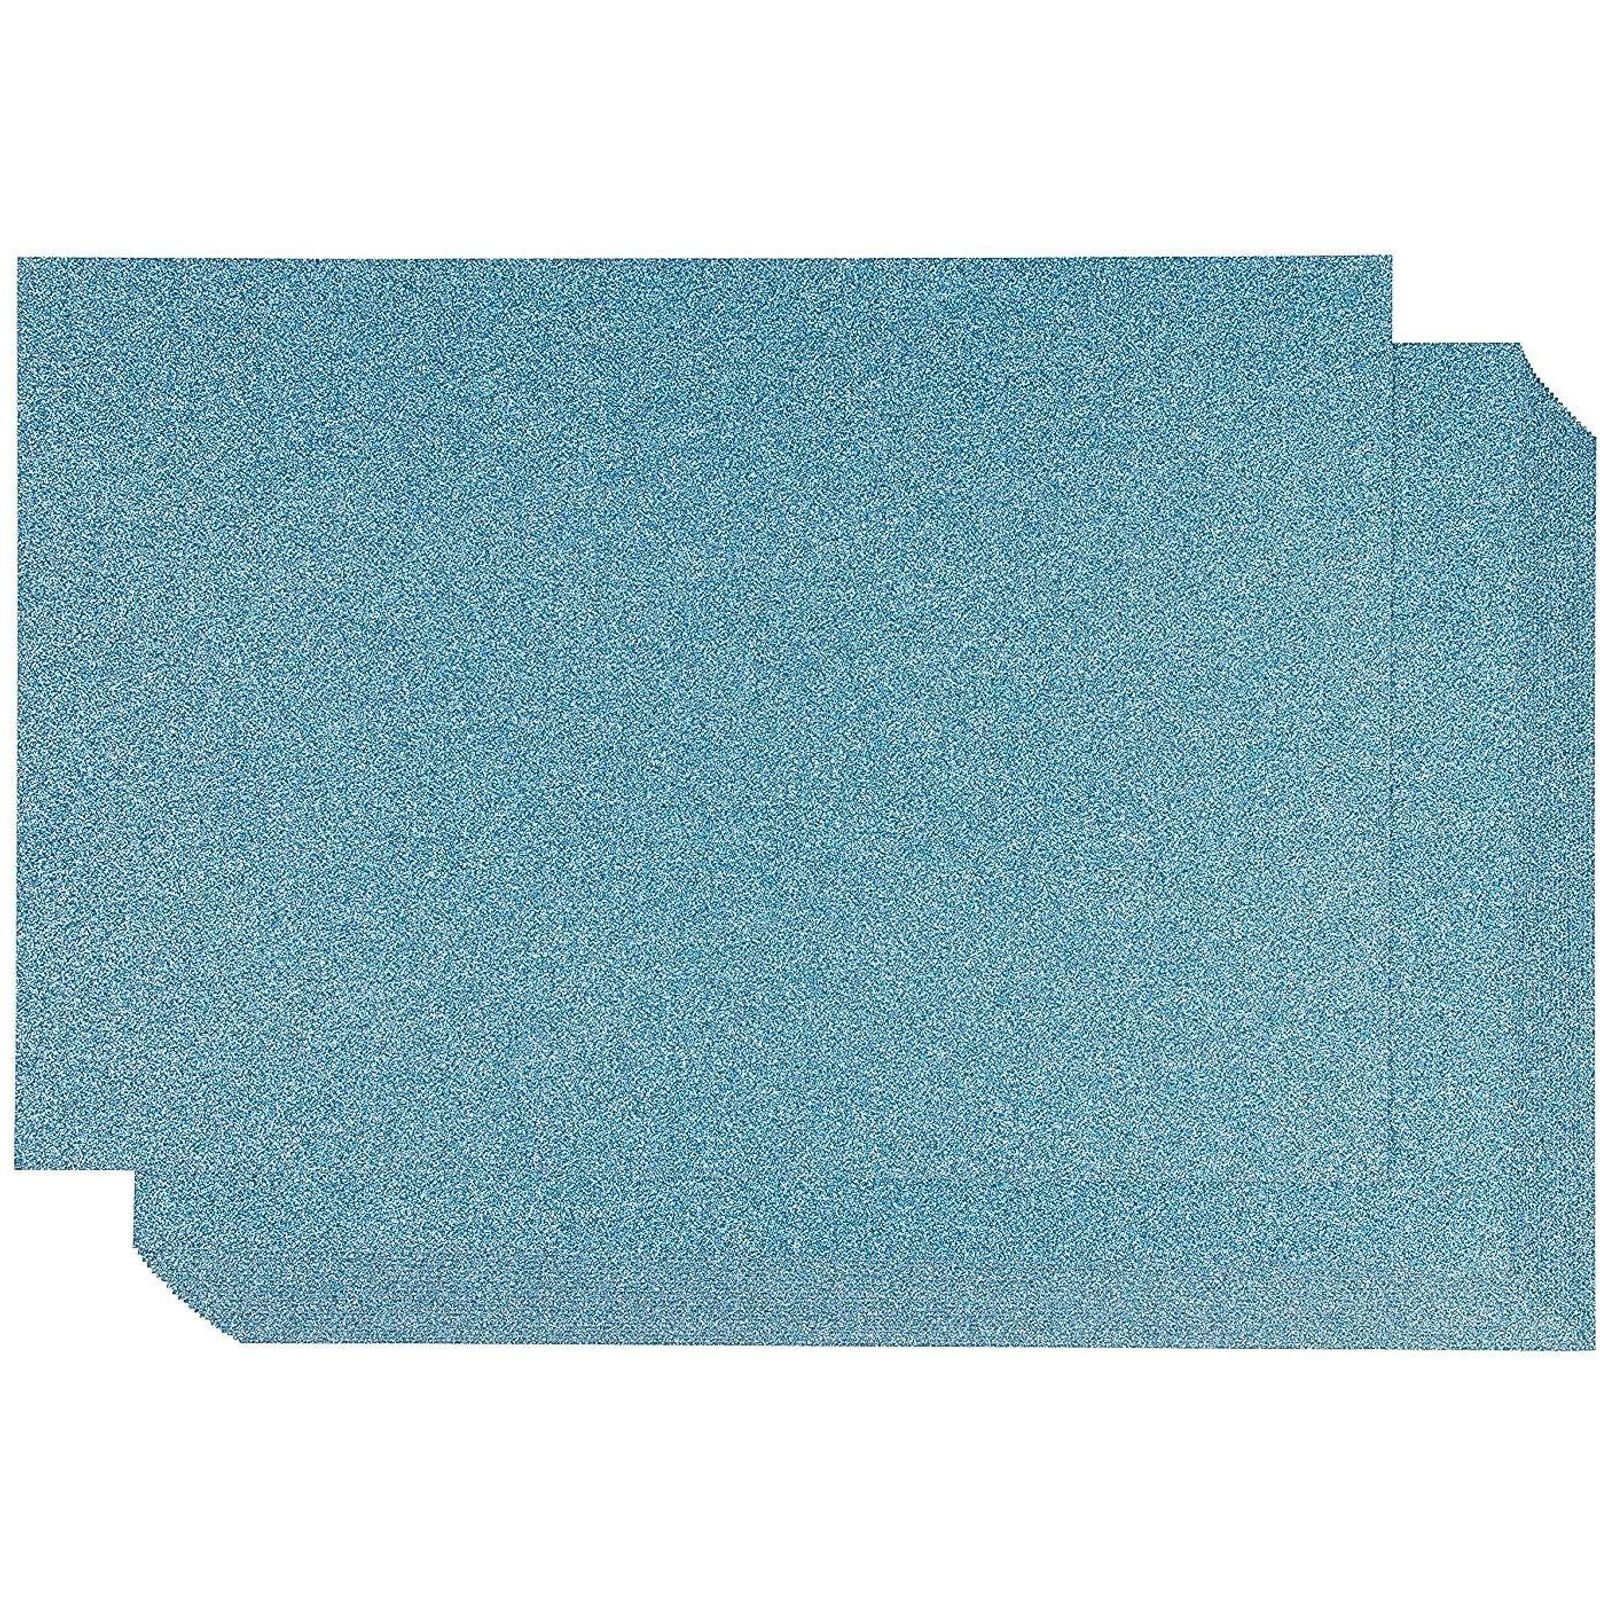 24 Pack Blue Glitter Cardstock for Crafts & Party Decor, Double Side, 8 x  12 in. 